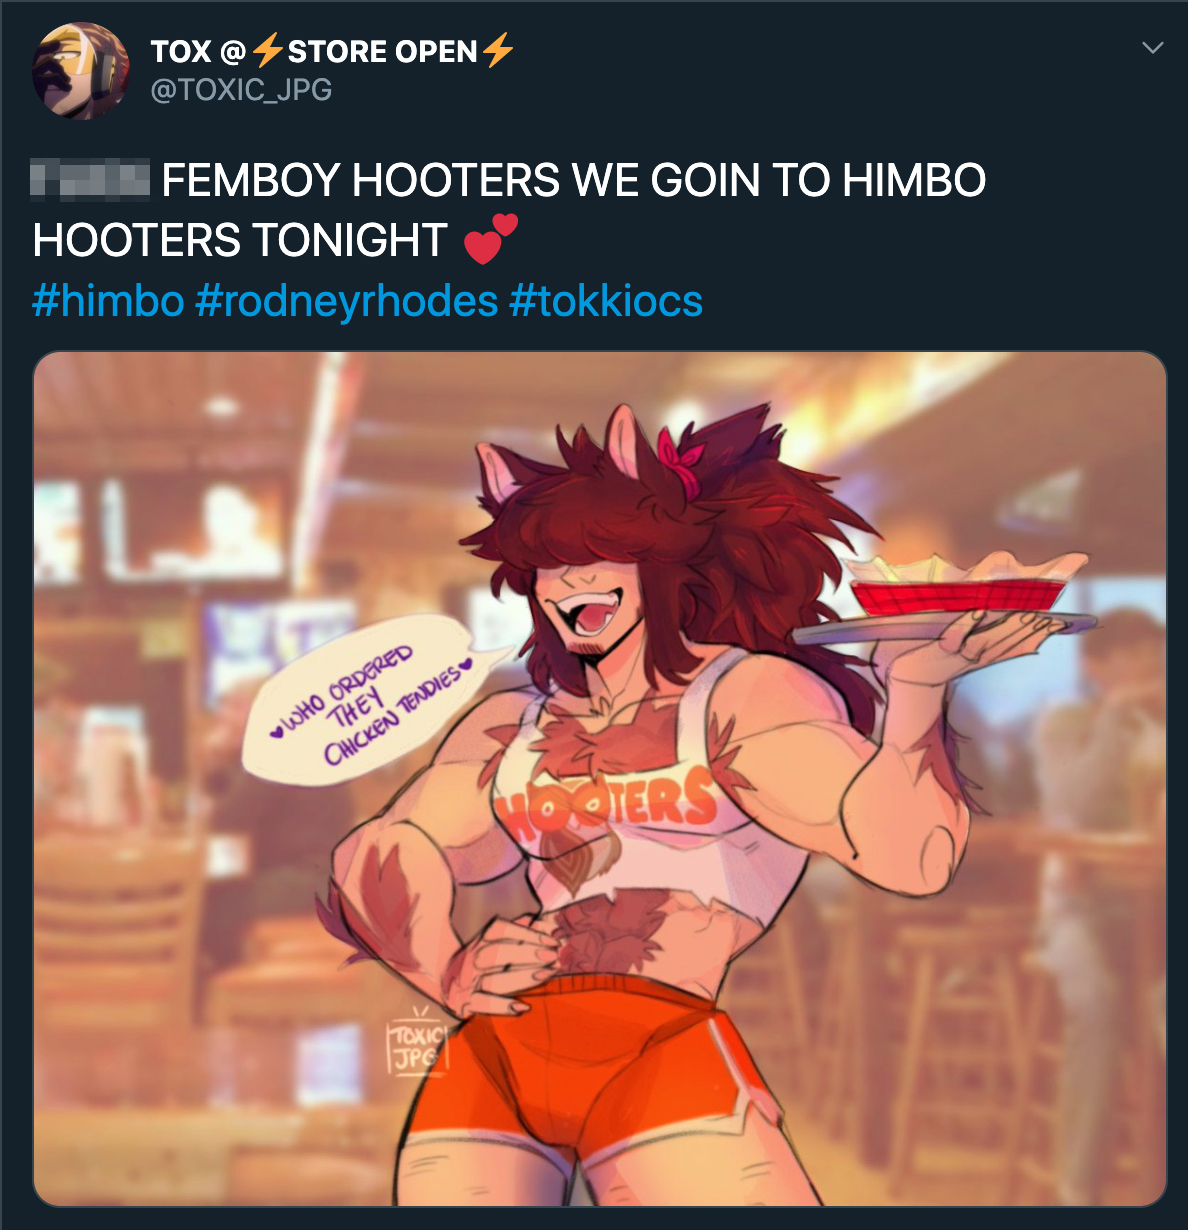 Fuck Femboy Hooters We Goin To Himbo Hooters Tonight Who Ordered They Chicken tendies